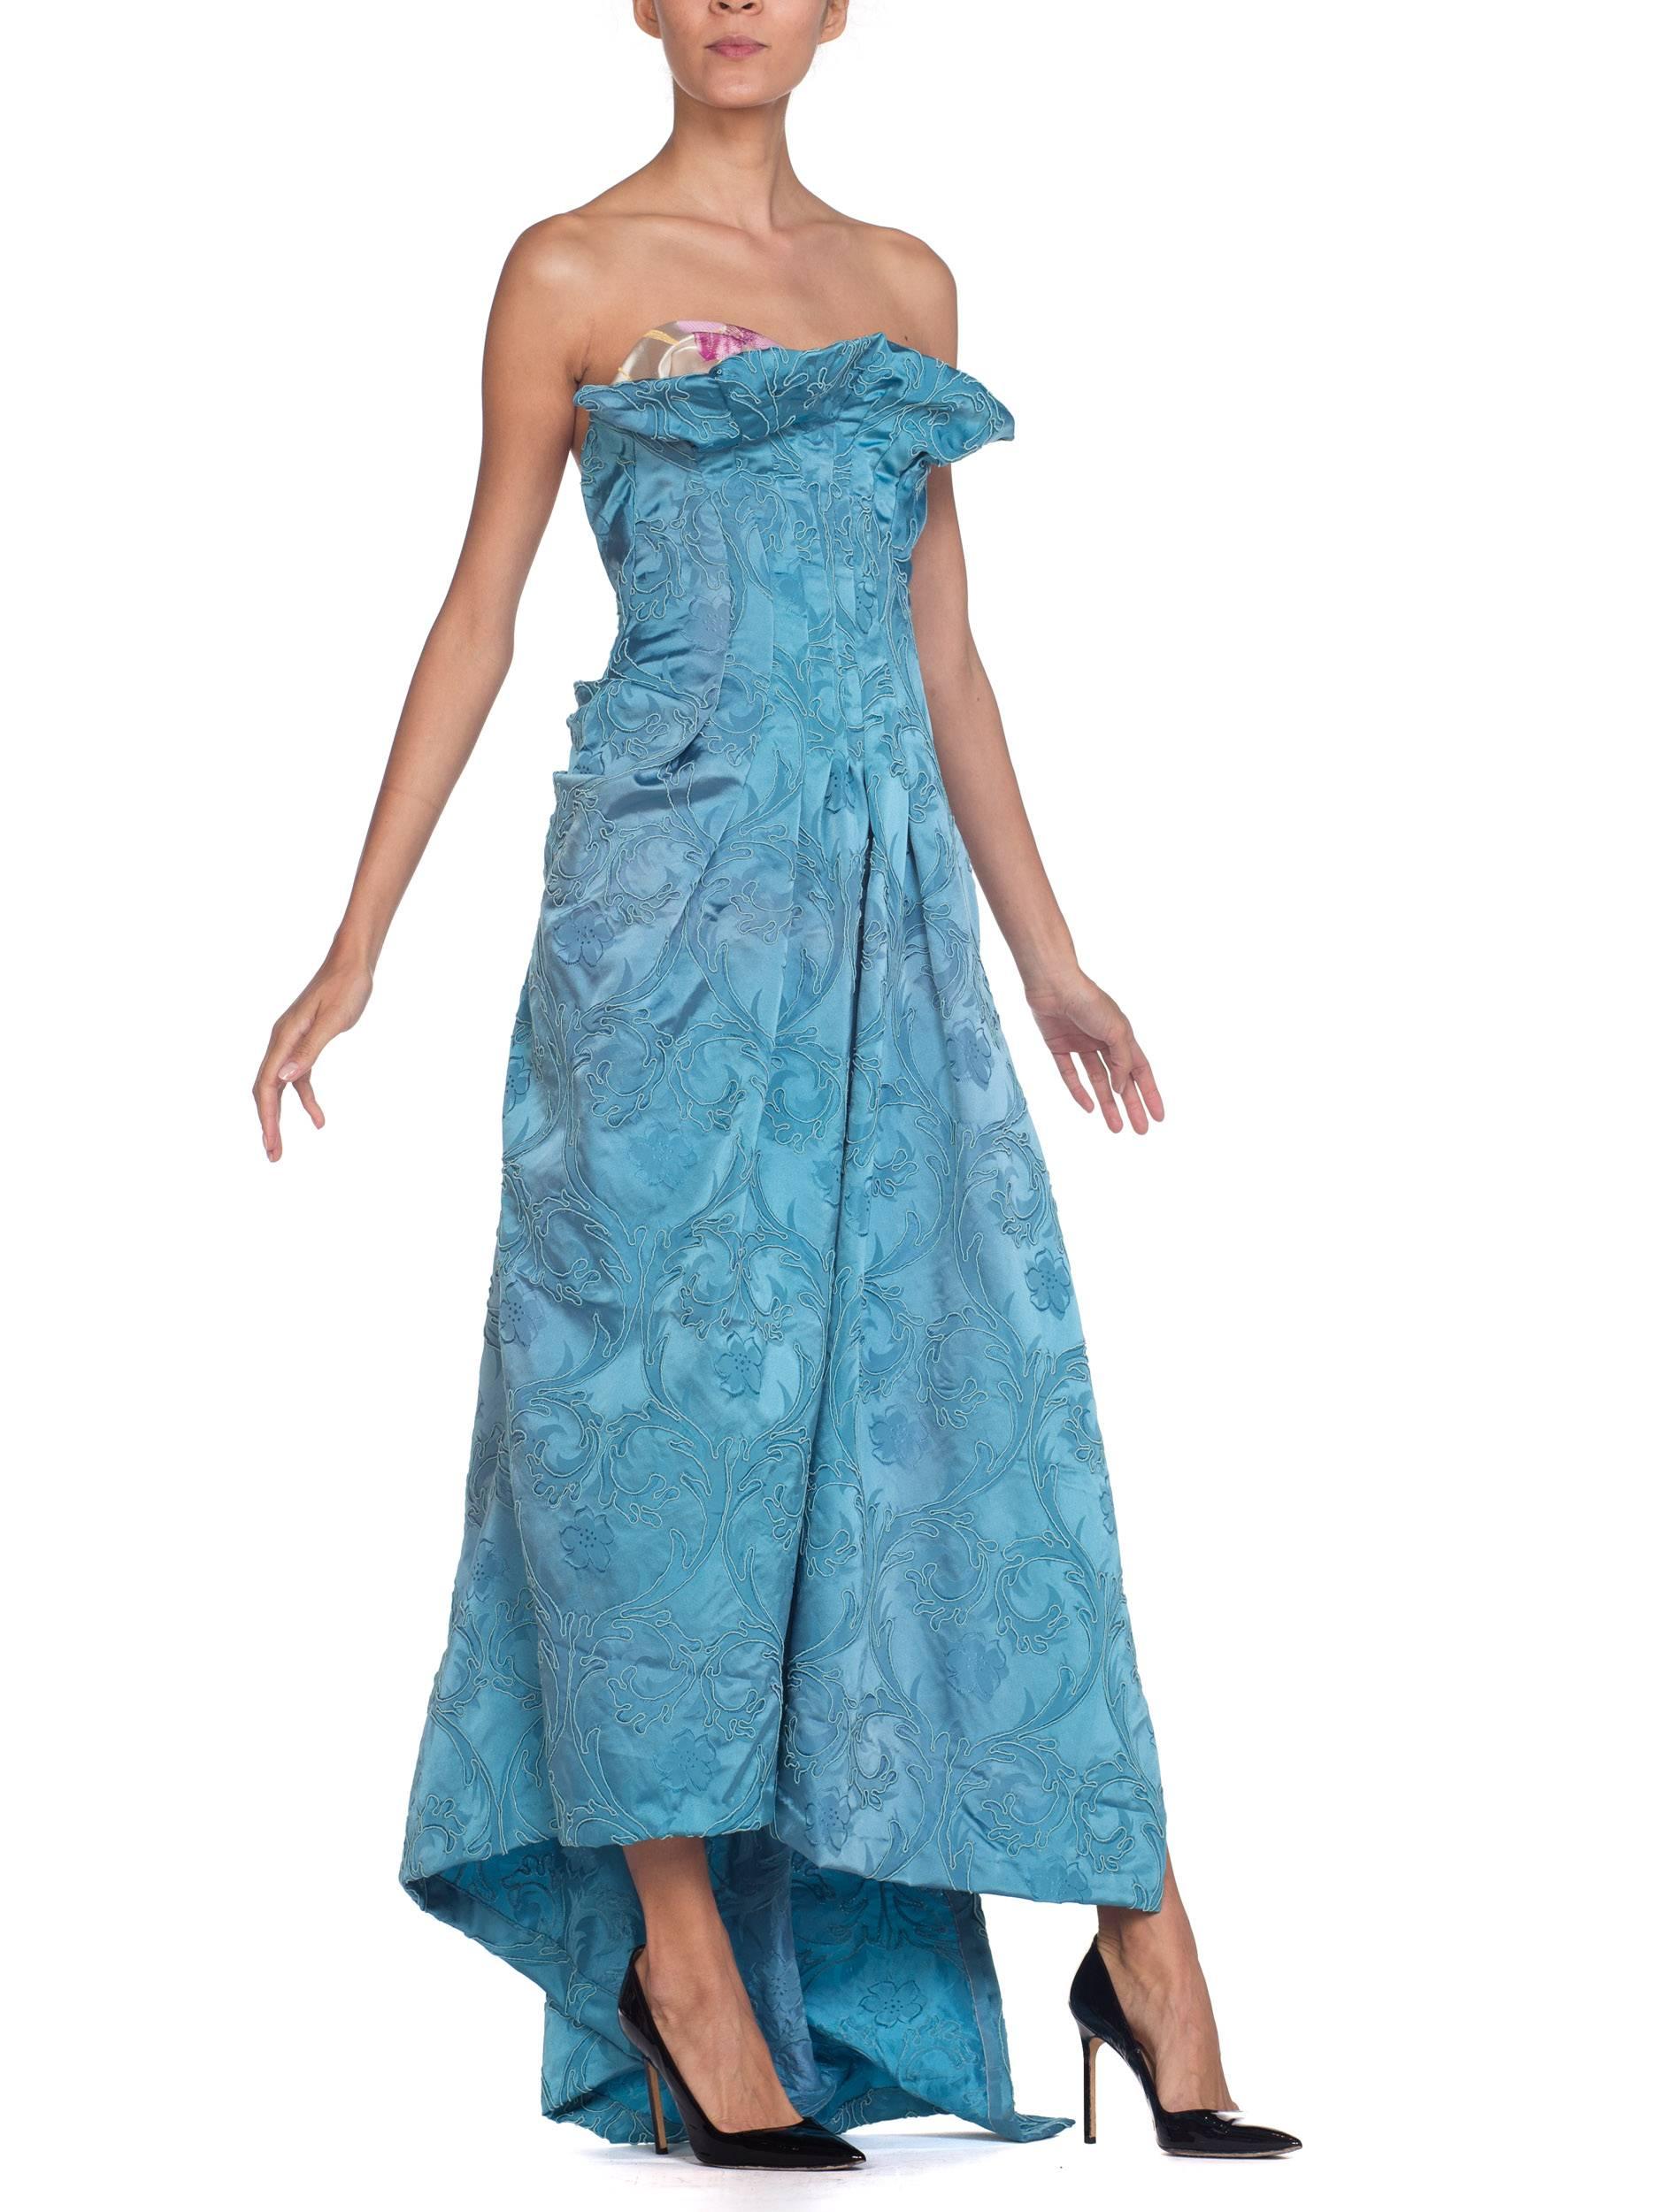 Made from upcycled fabrics from the 1950s & 1940s so there are some areas of slight fading to the fabrics but this is seen as a sign of their age and beauty, adding to the askew beauty of this gown.  MORPHEW COLLECTION Aquamarine Blue Rayon & Silk